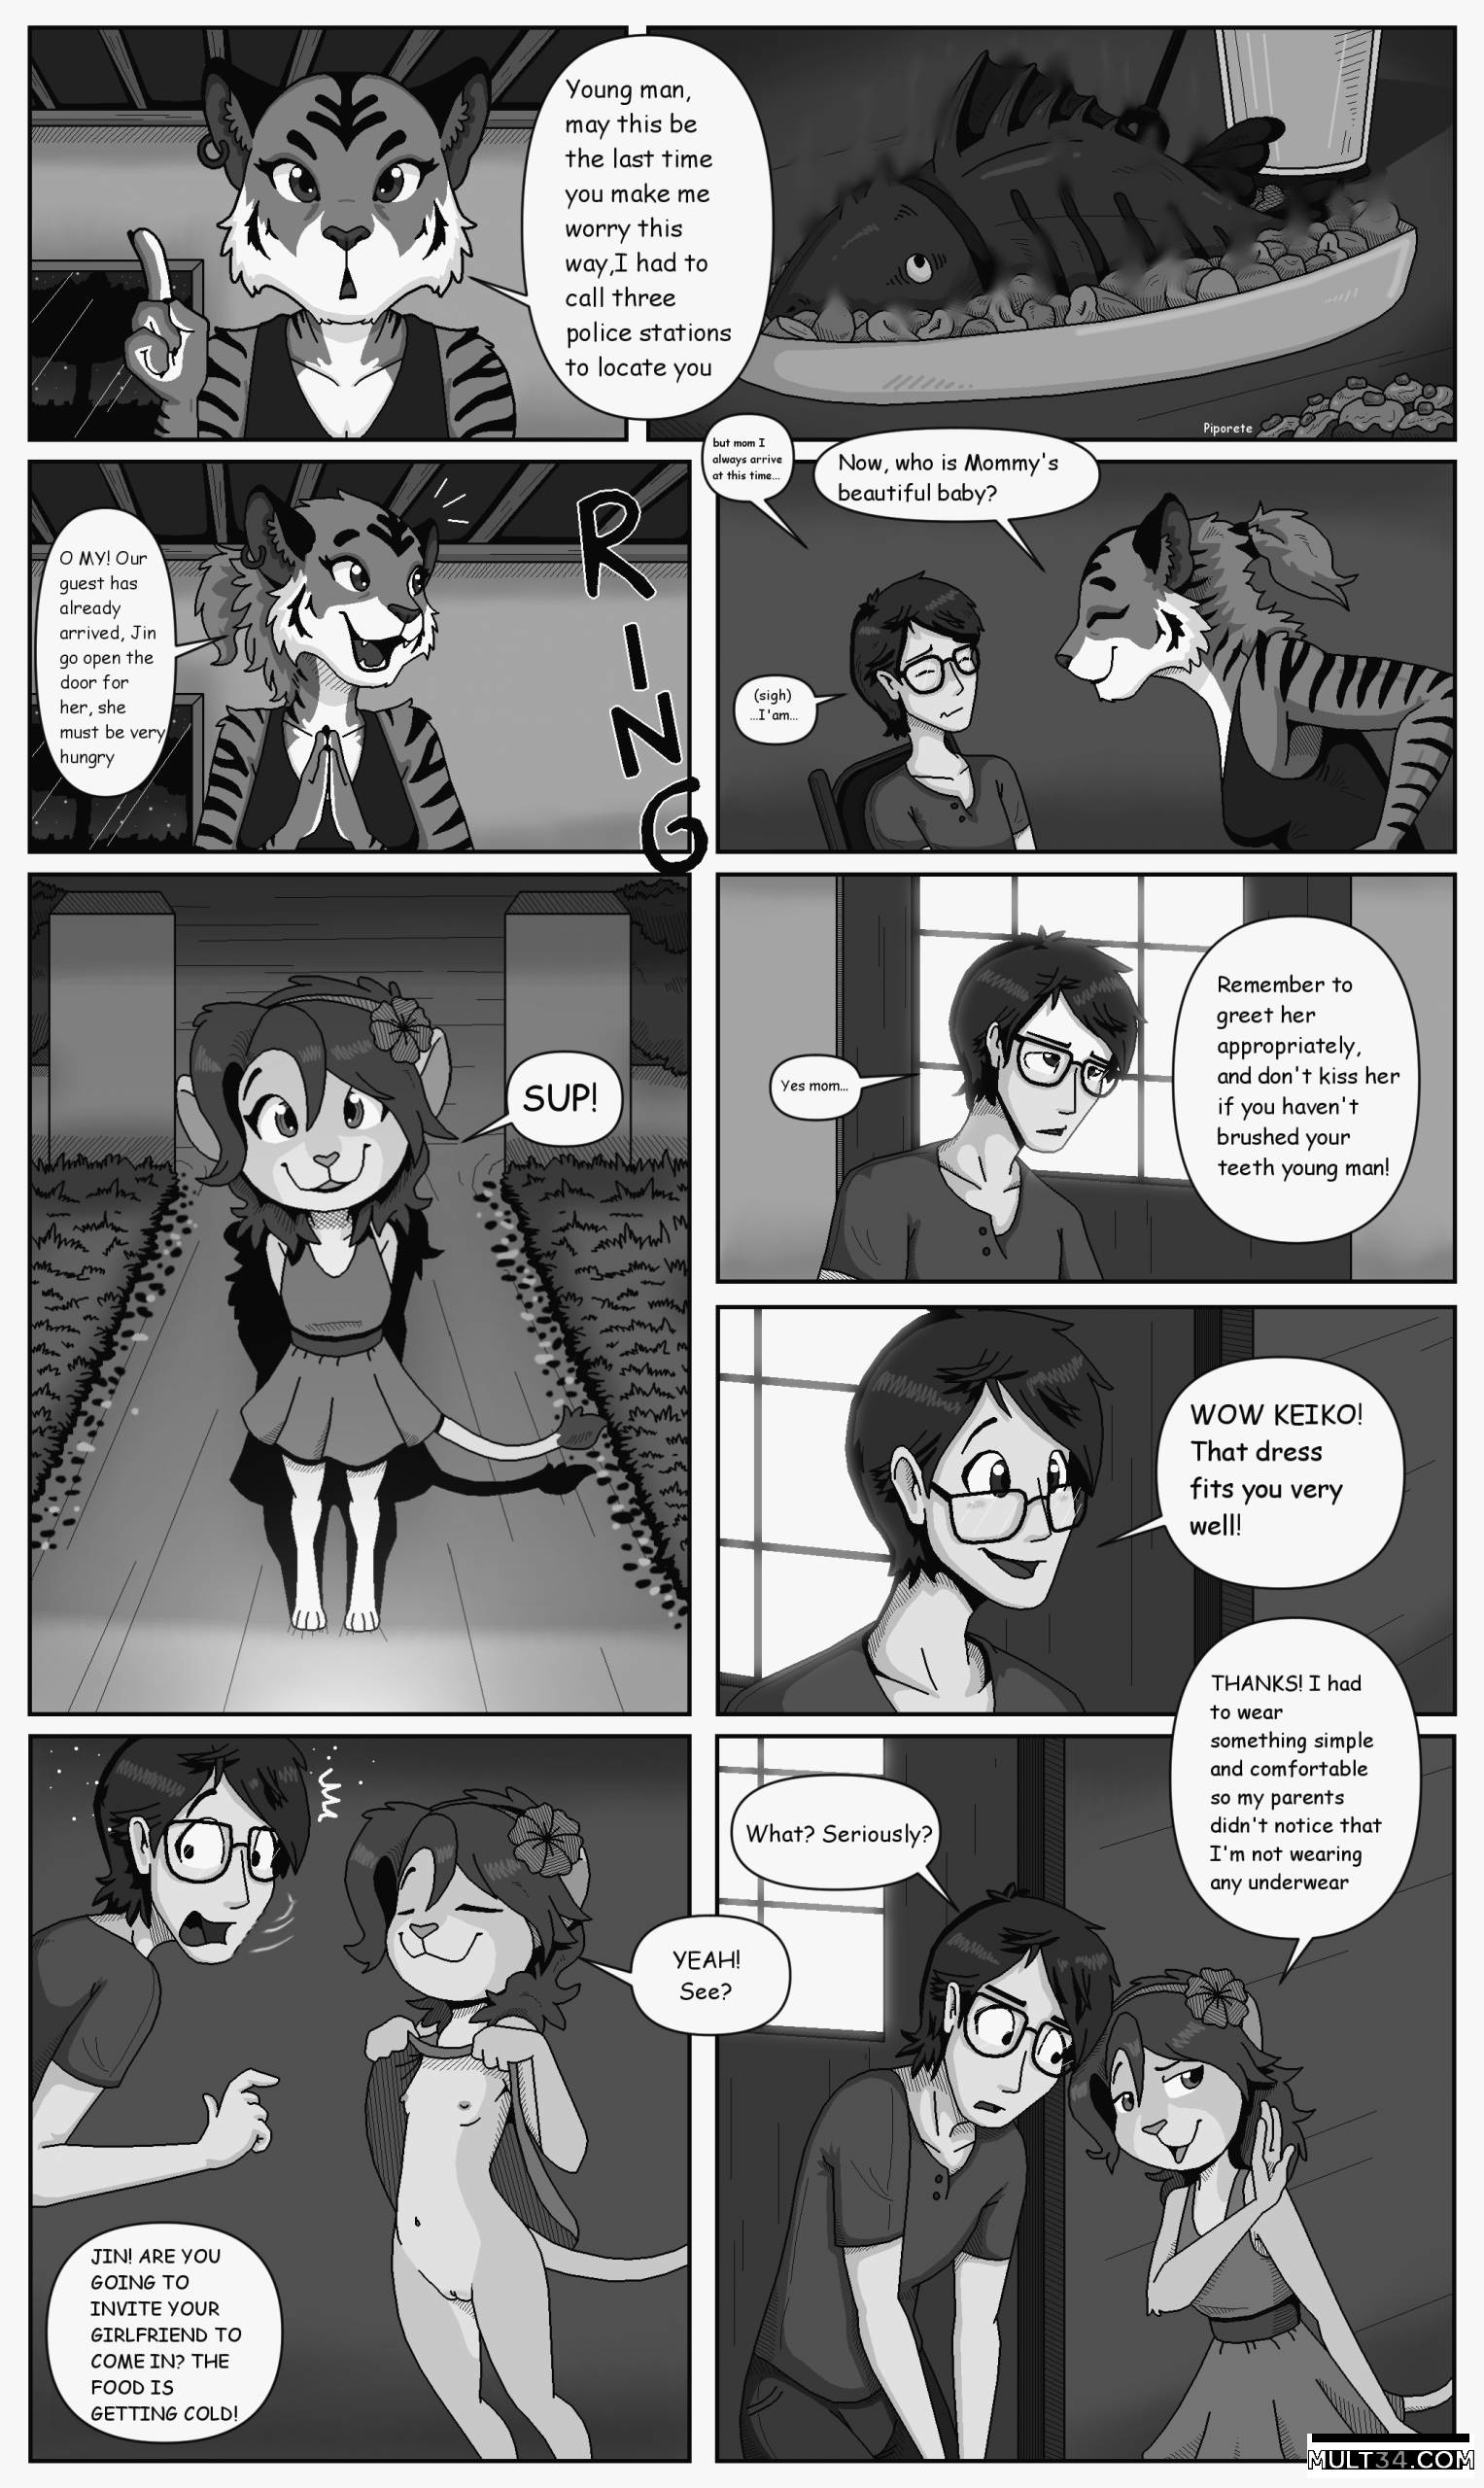 Keiko and Jin - Chapter 1 - 3 page 6